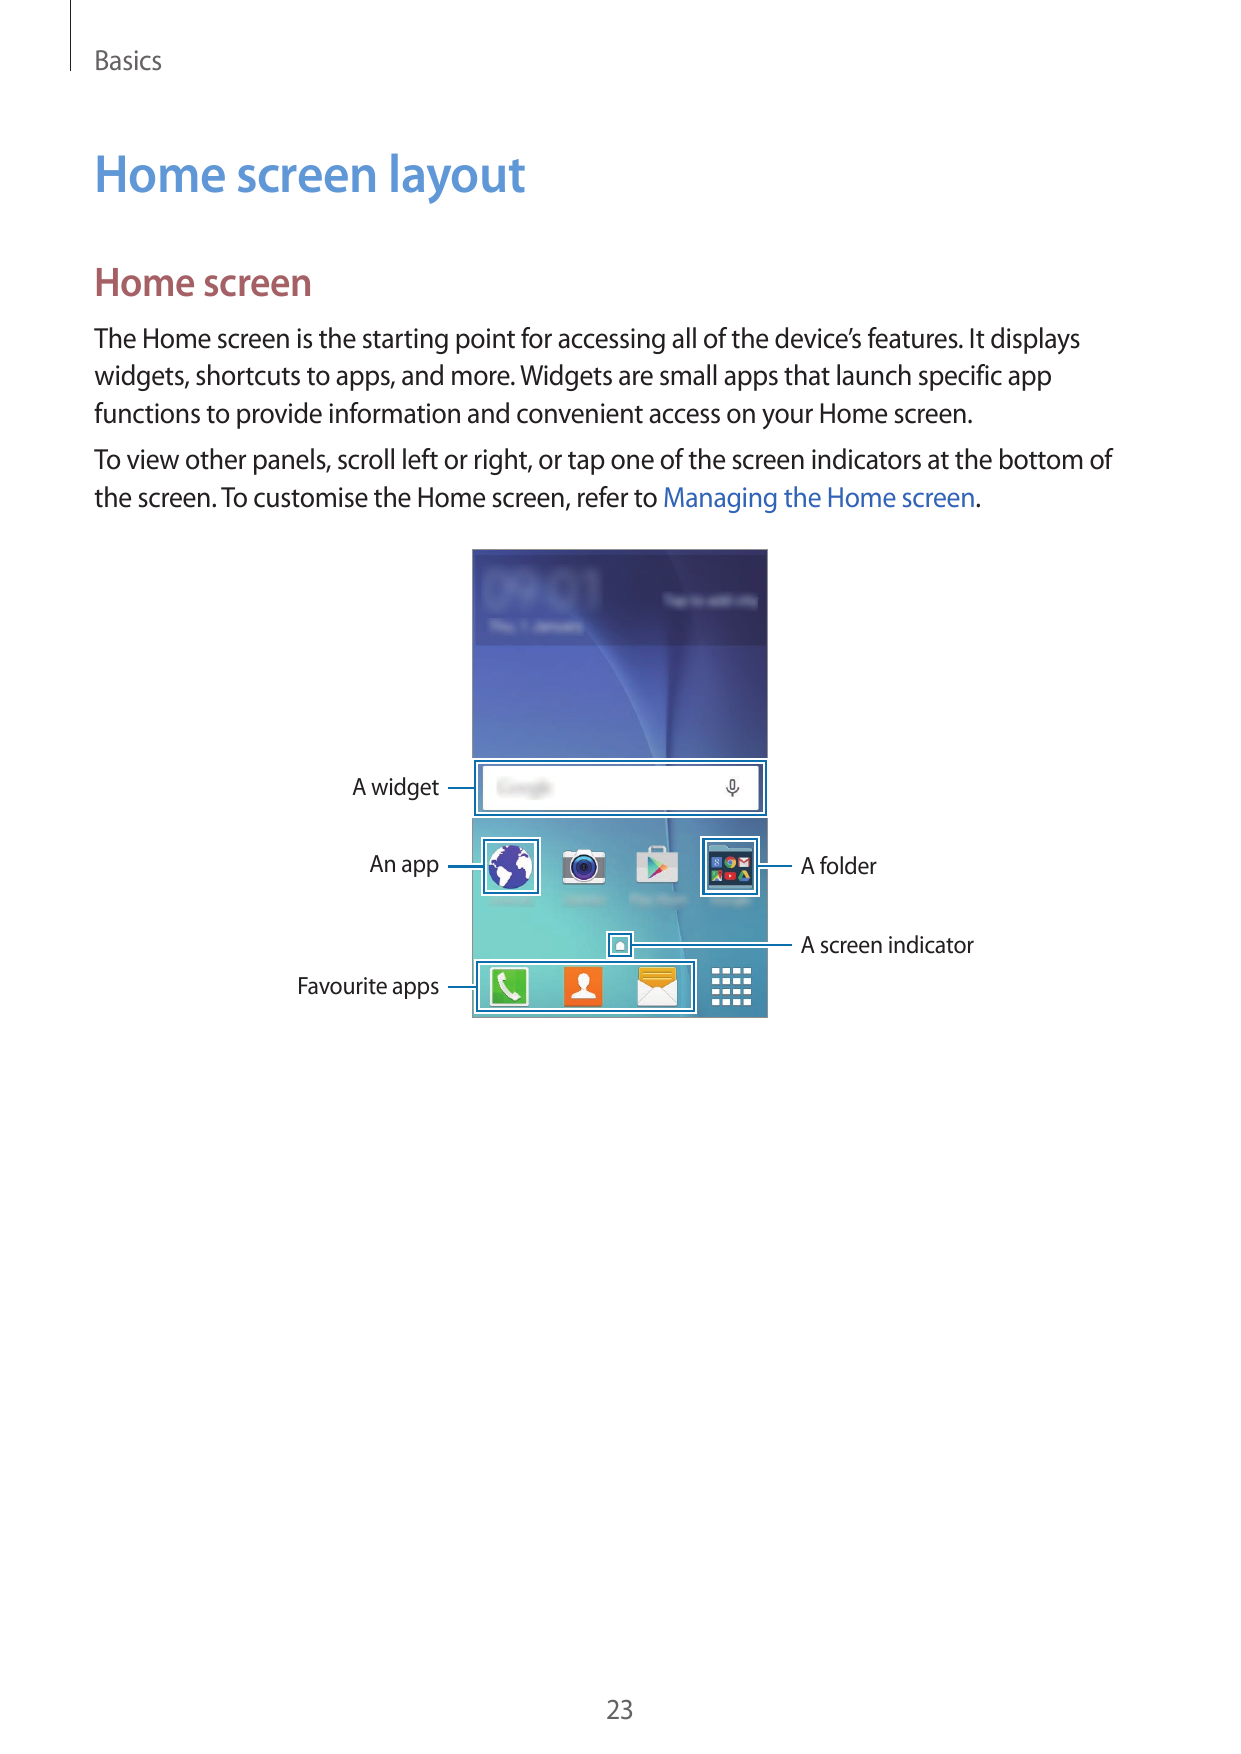 BasicsHome screen layoutHome screenThe Home screen is the starting point for accessing all of the device’s features. It displays